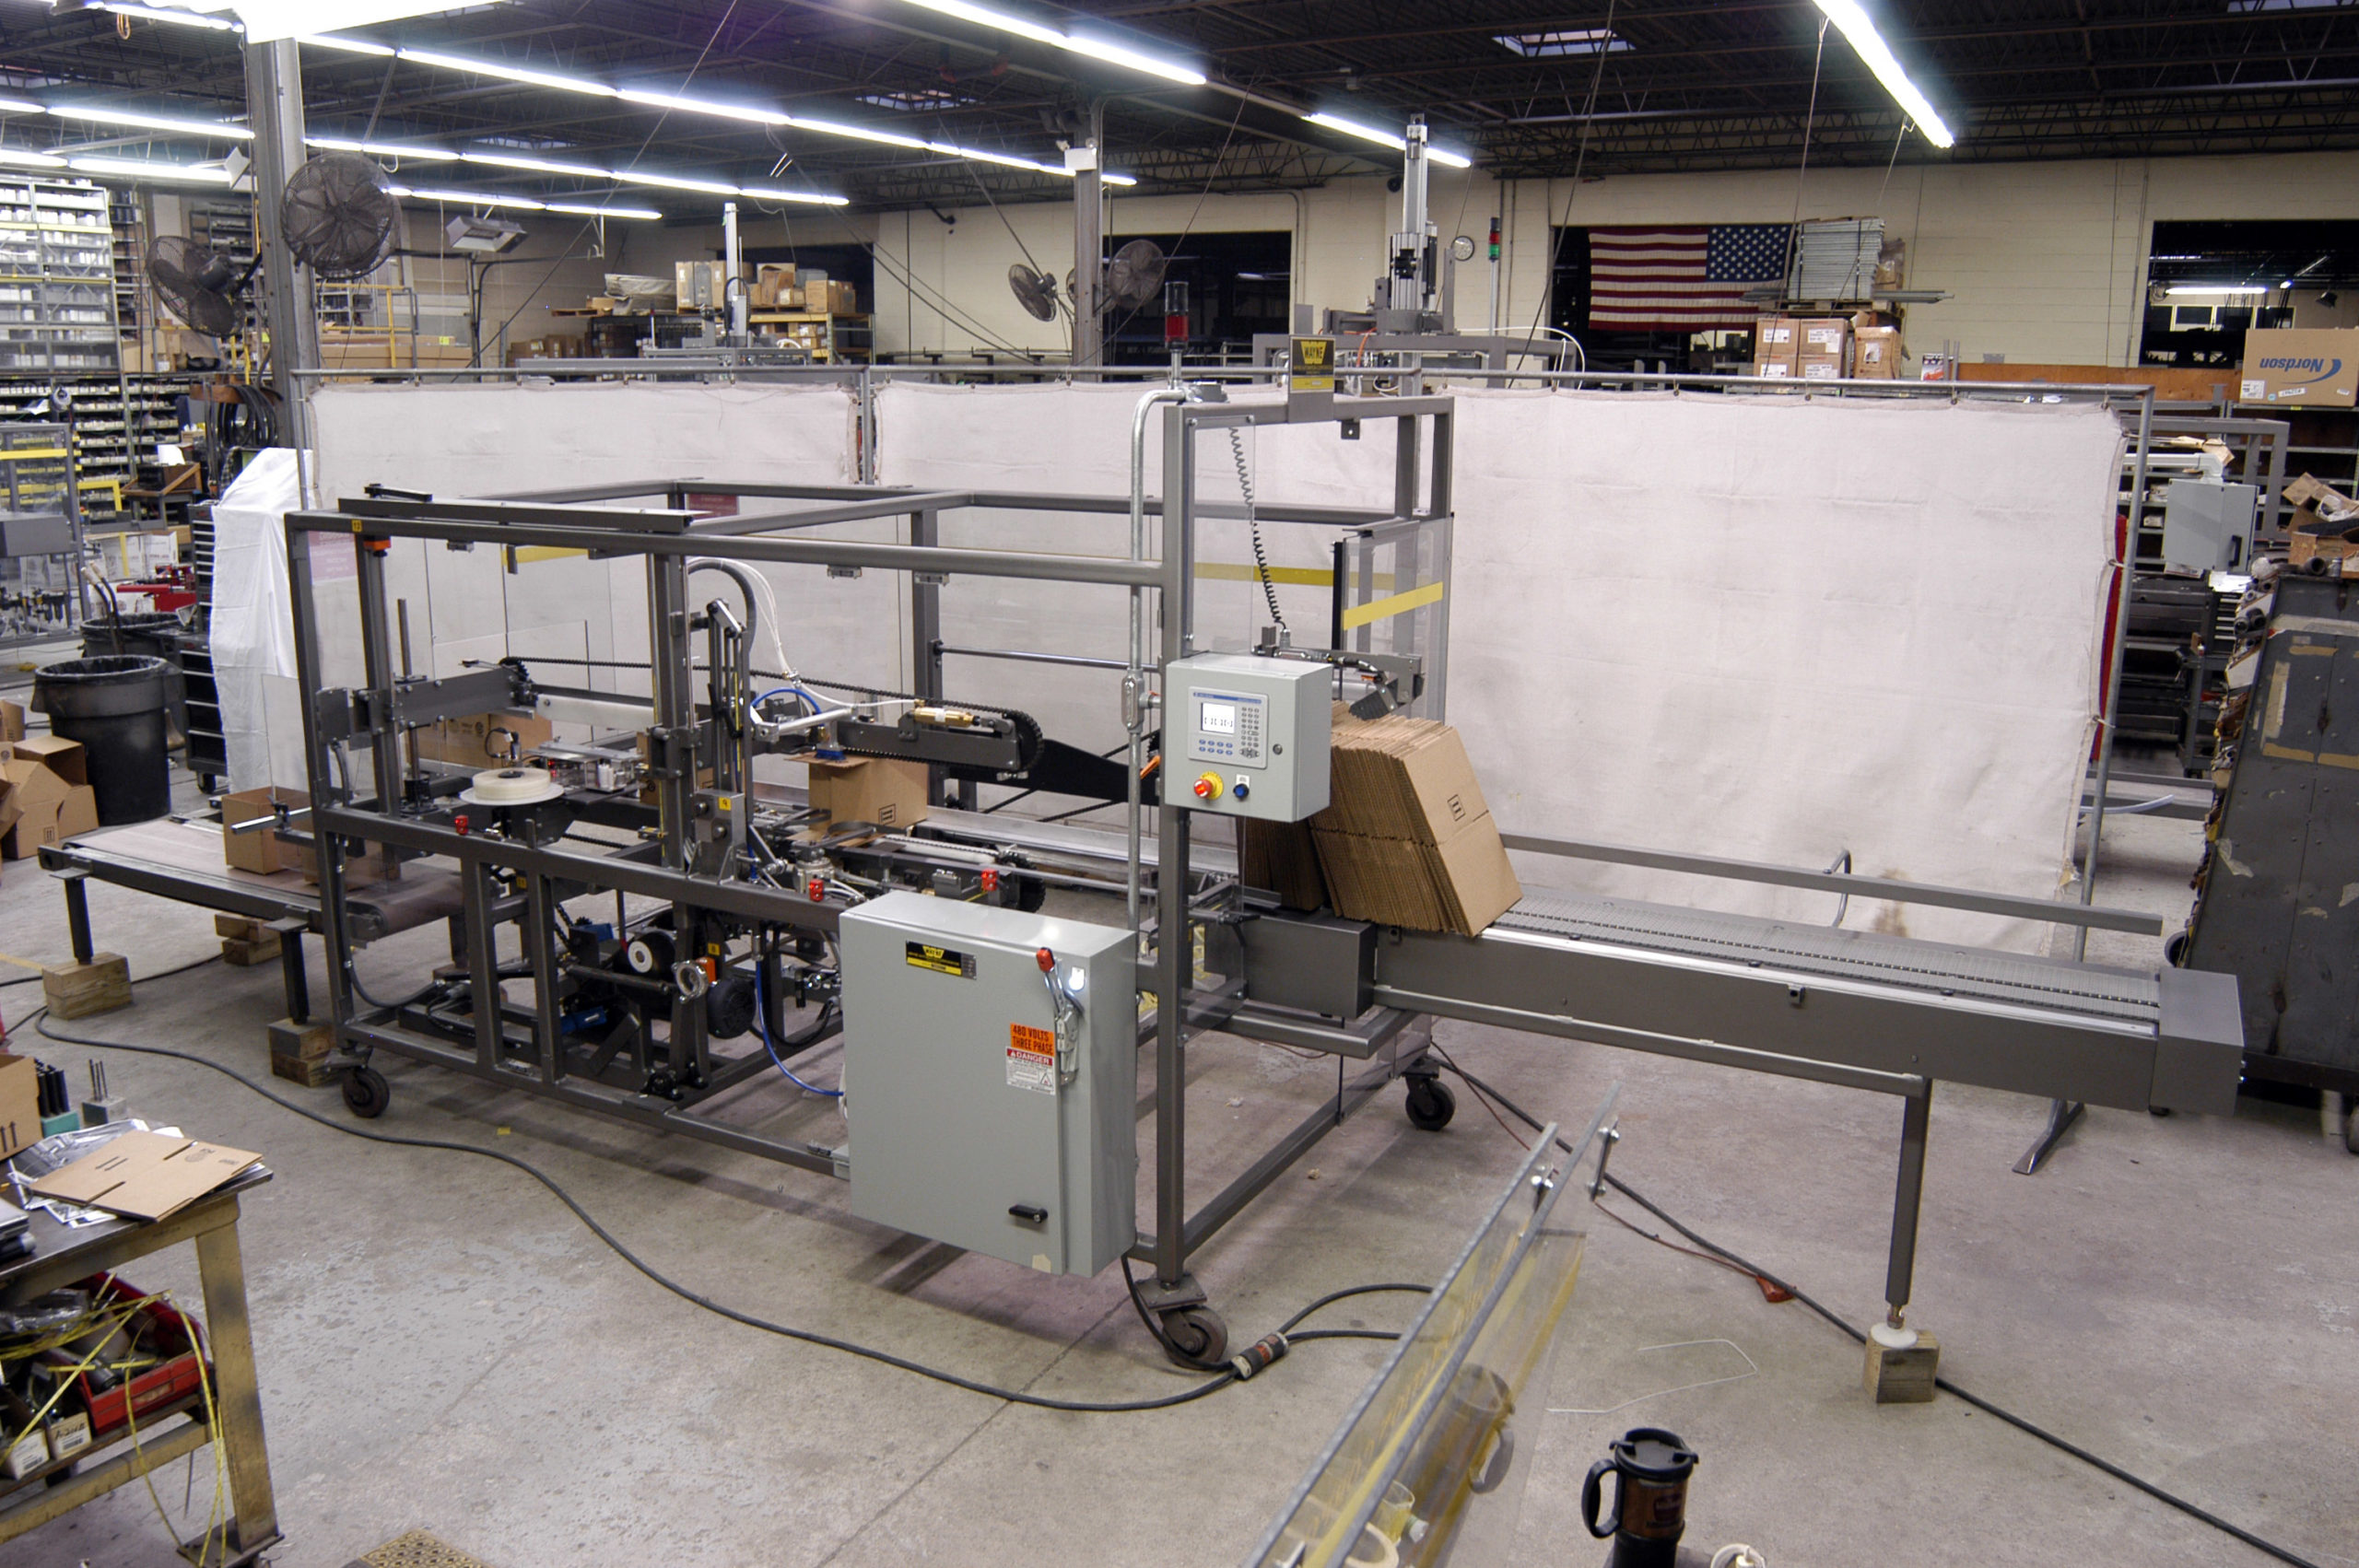 Large case erector from Wayne Automation sits on warehouse floor, assembling a high volume of corrugated boxes. 